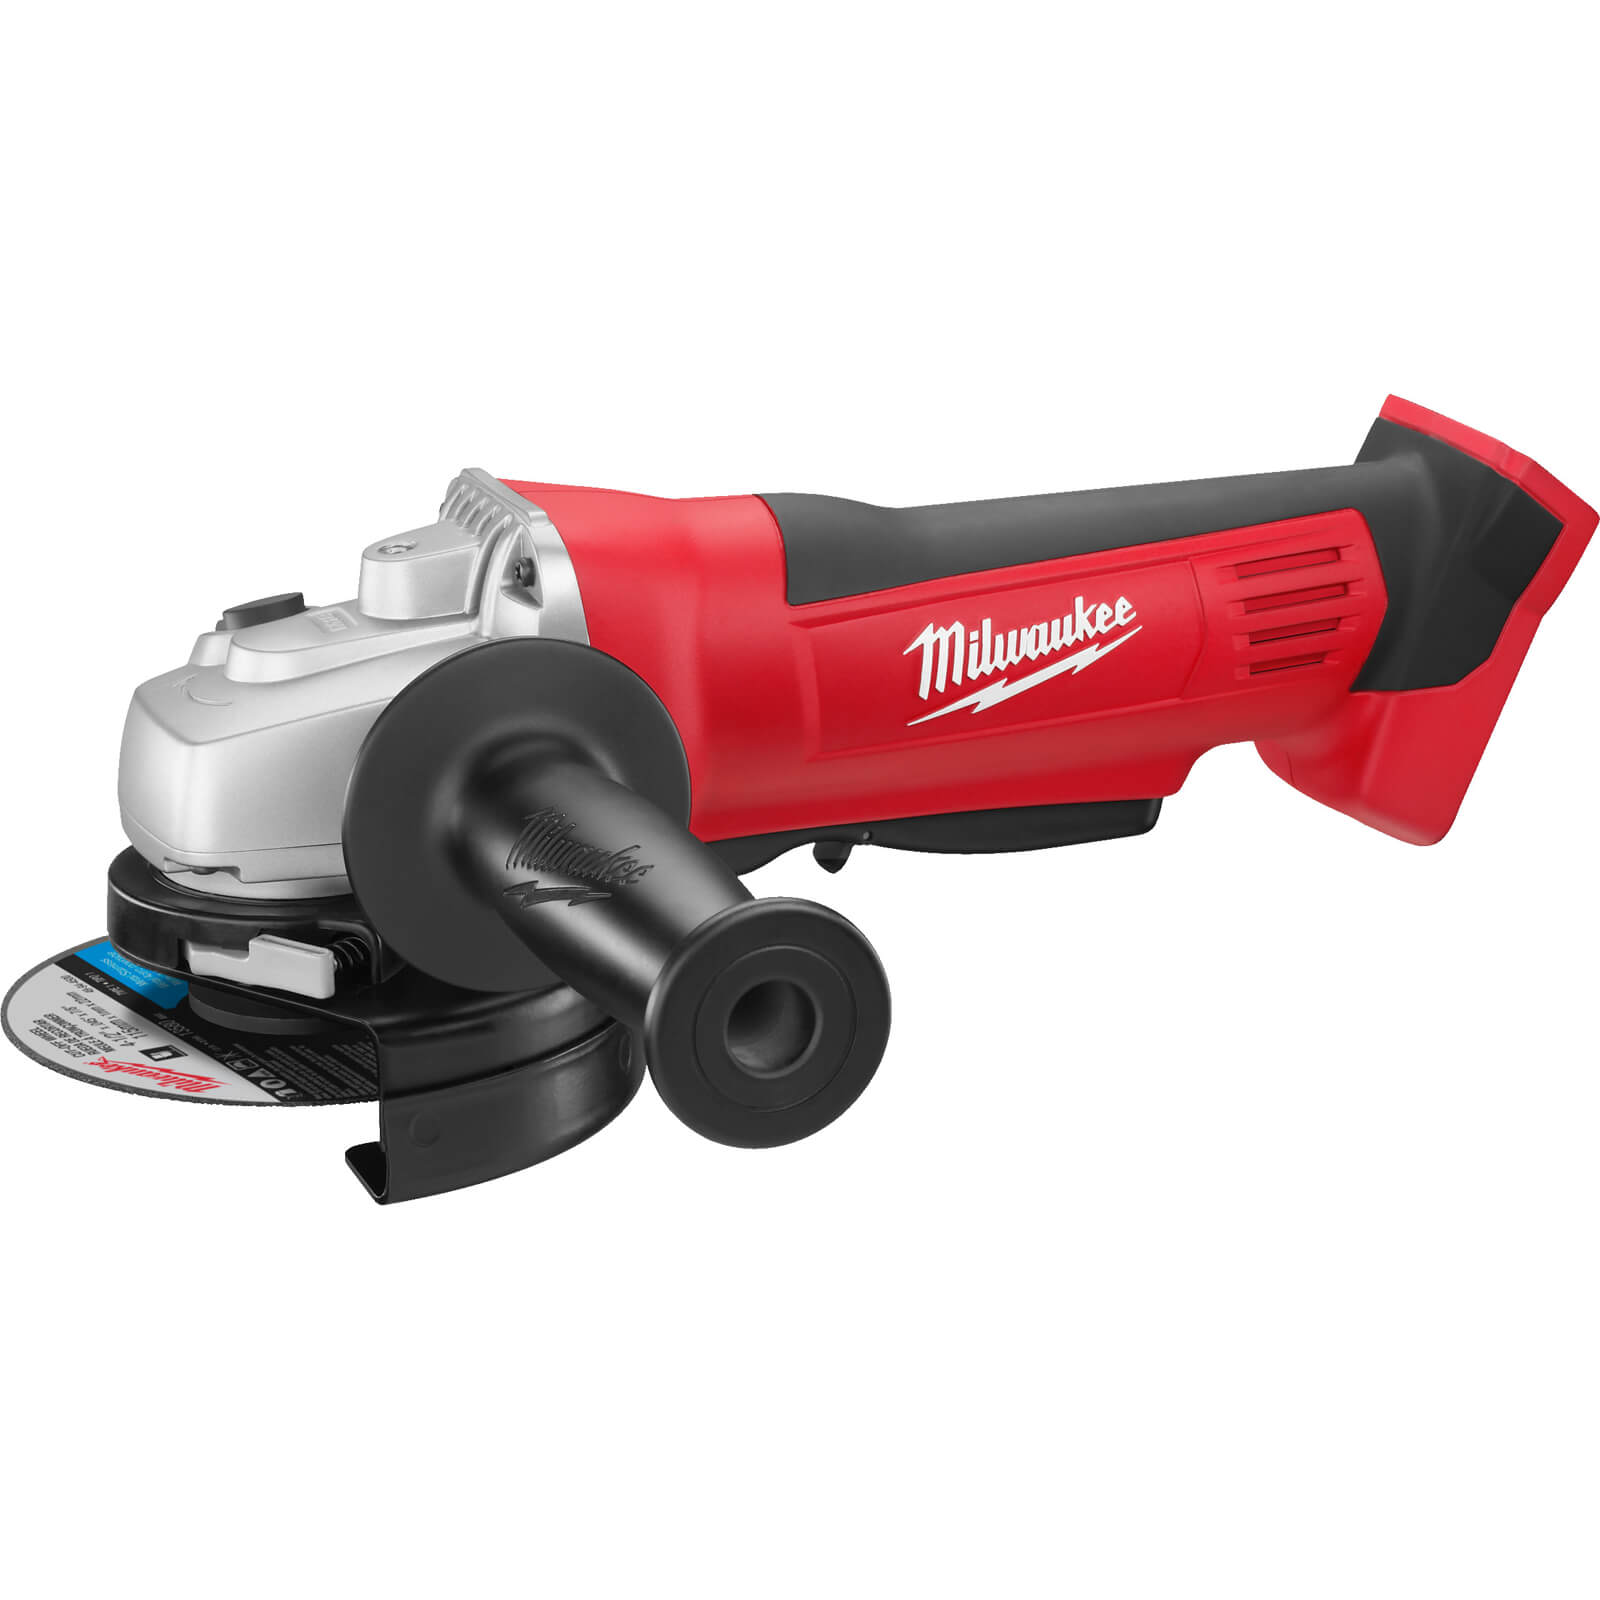 Image of Milwaukee HD18 AG-115 18v Cordless Angle Grinder 115mm No Batteries No Charger No Case